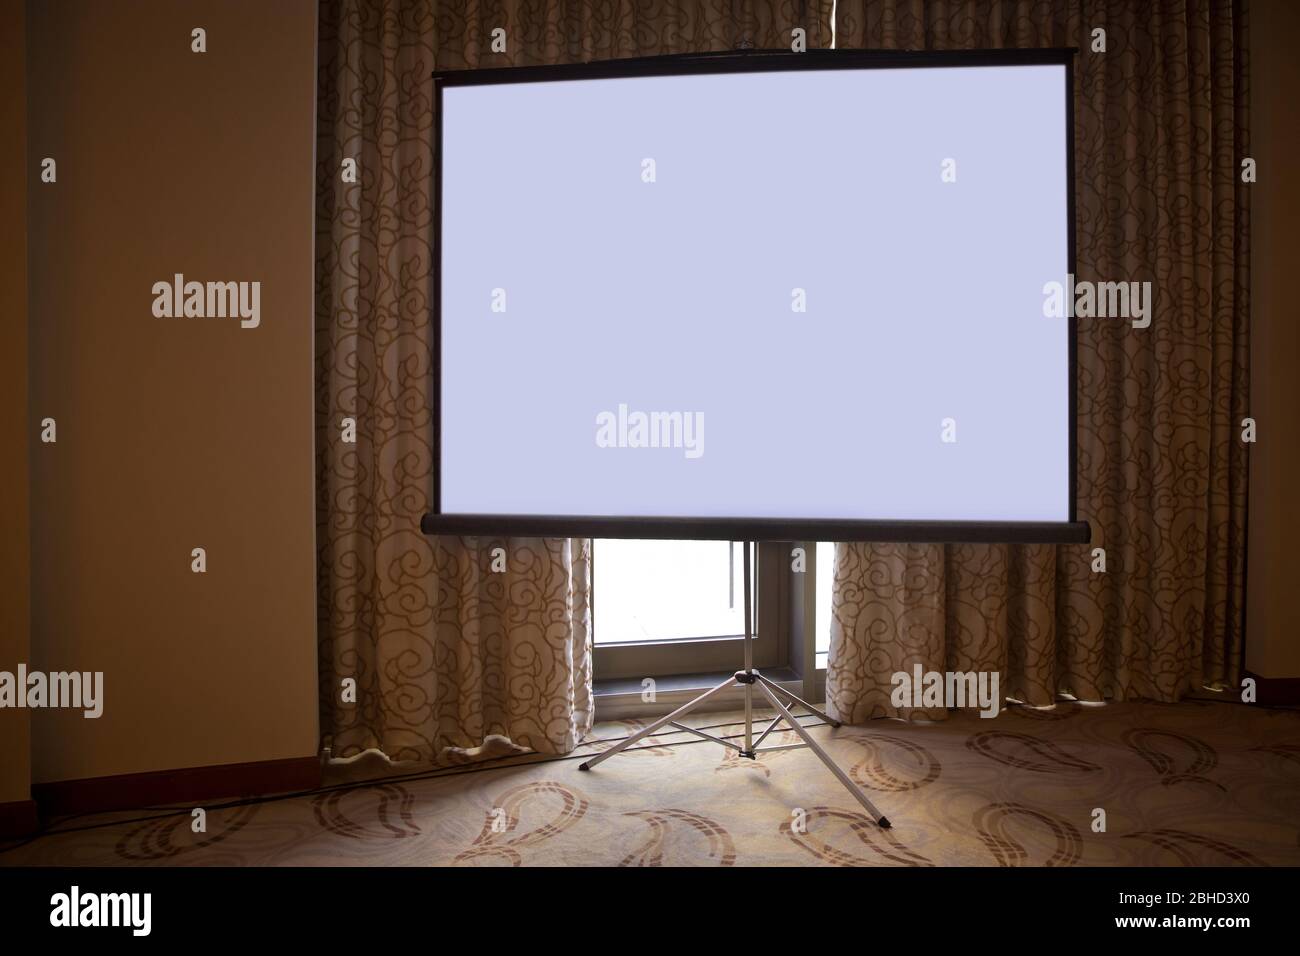 SCREEN PROJEKTOR Tripod Layar Proyektor meeting room . Blank projector  canvas in the confrance Stock Photo - Alamy